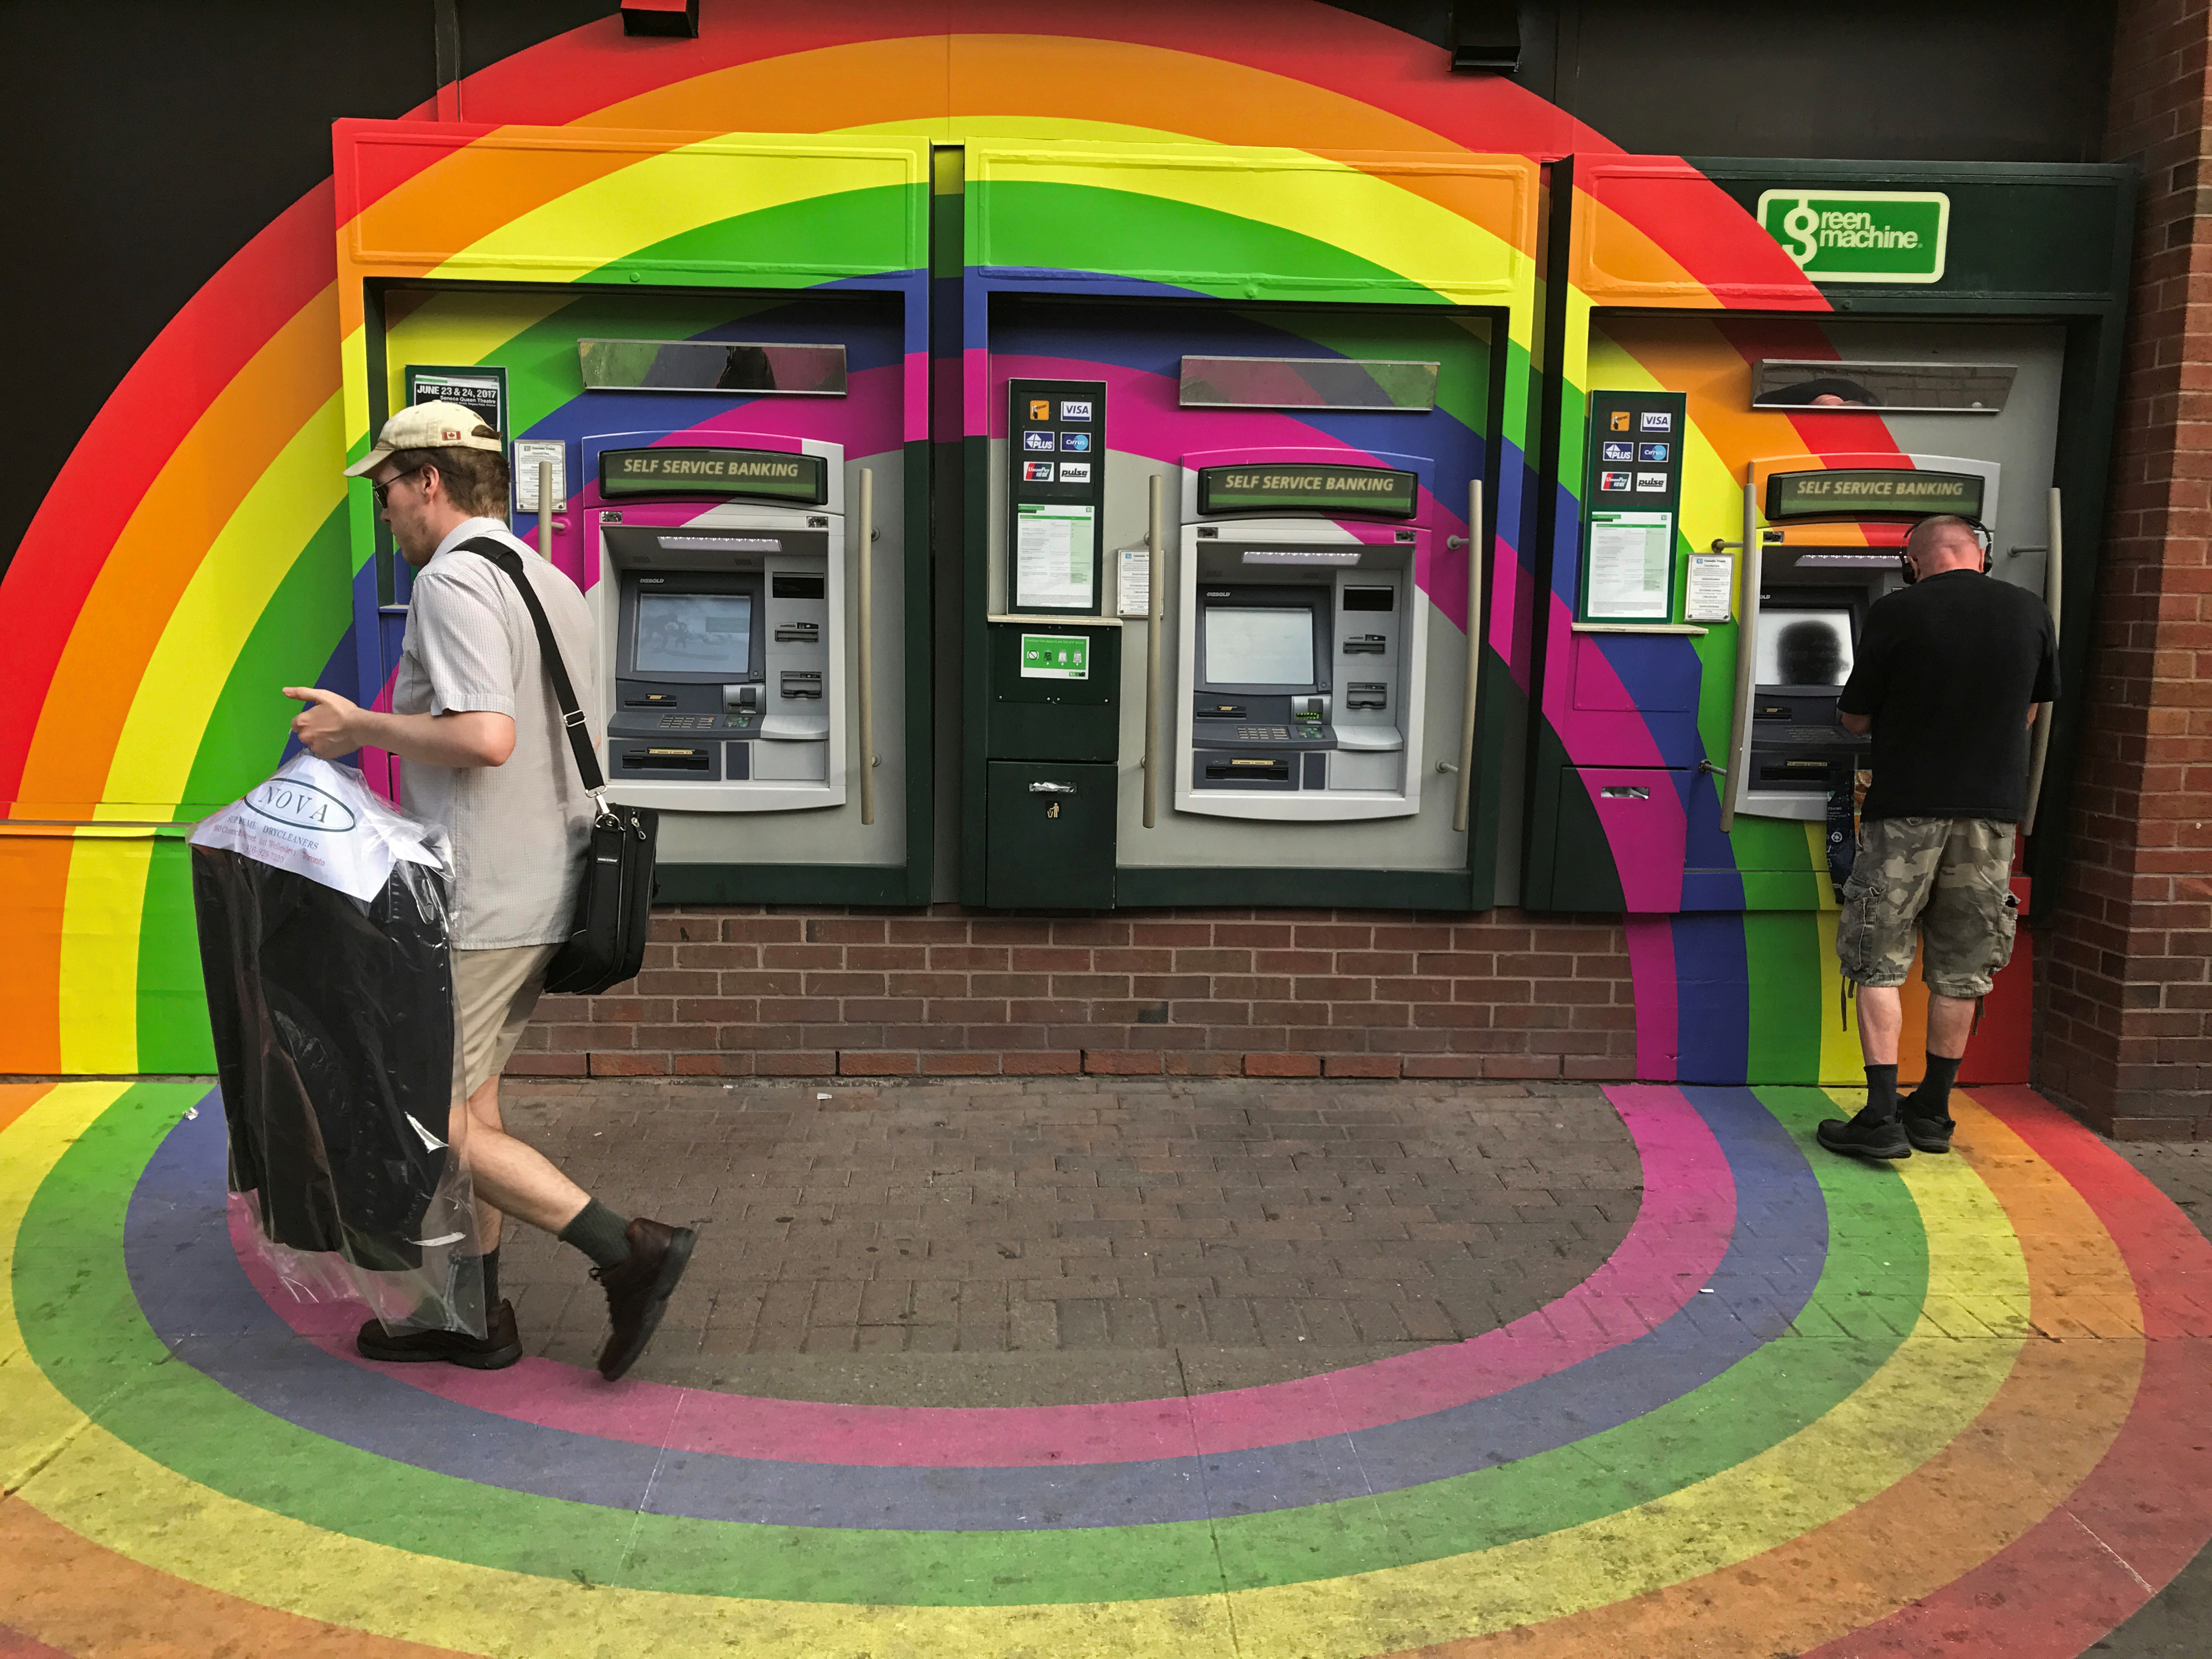 A customer withdraws money from an ATM at a Toronto-Dominion (TD) bank branch adorned in colours of the Pride rainbow flag symbolizing gay rights, in downtown Toronto, Ontario, Canada June 13, 2017.  REUTERS/Chris Helgren